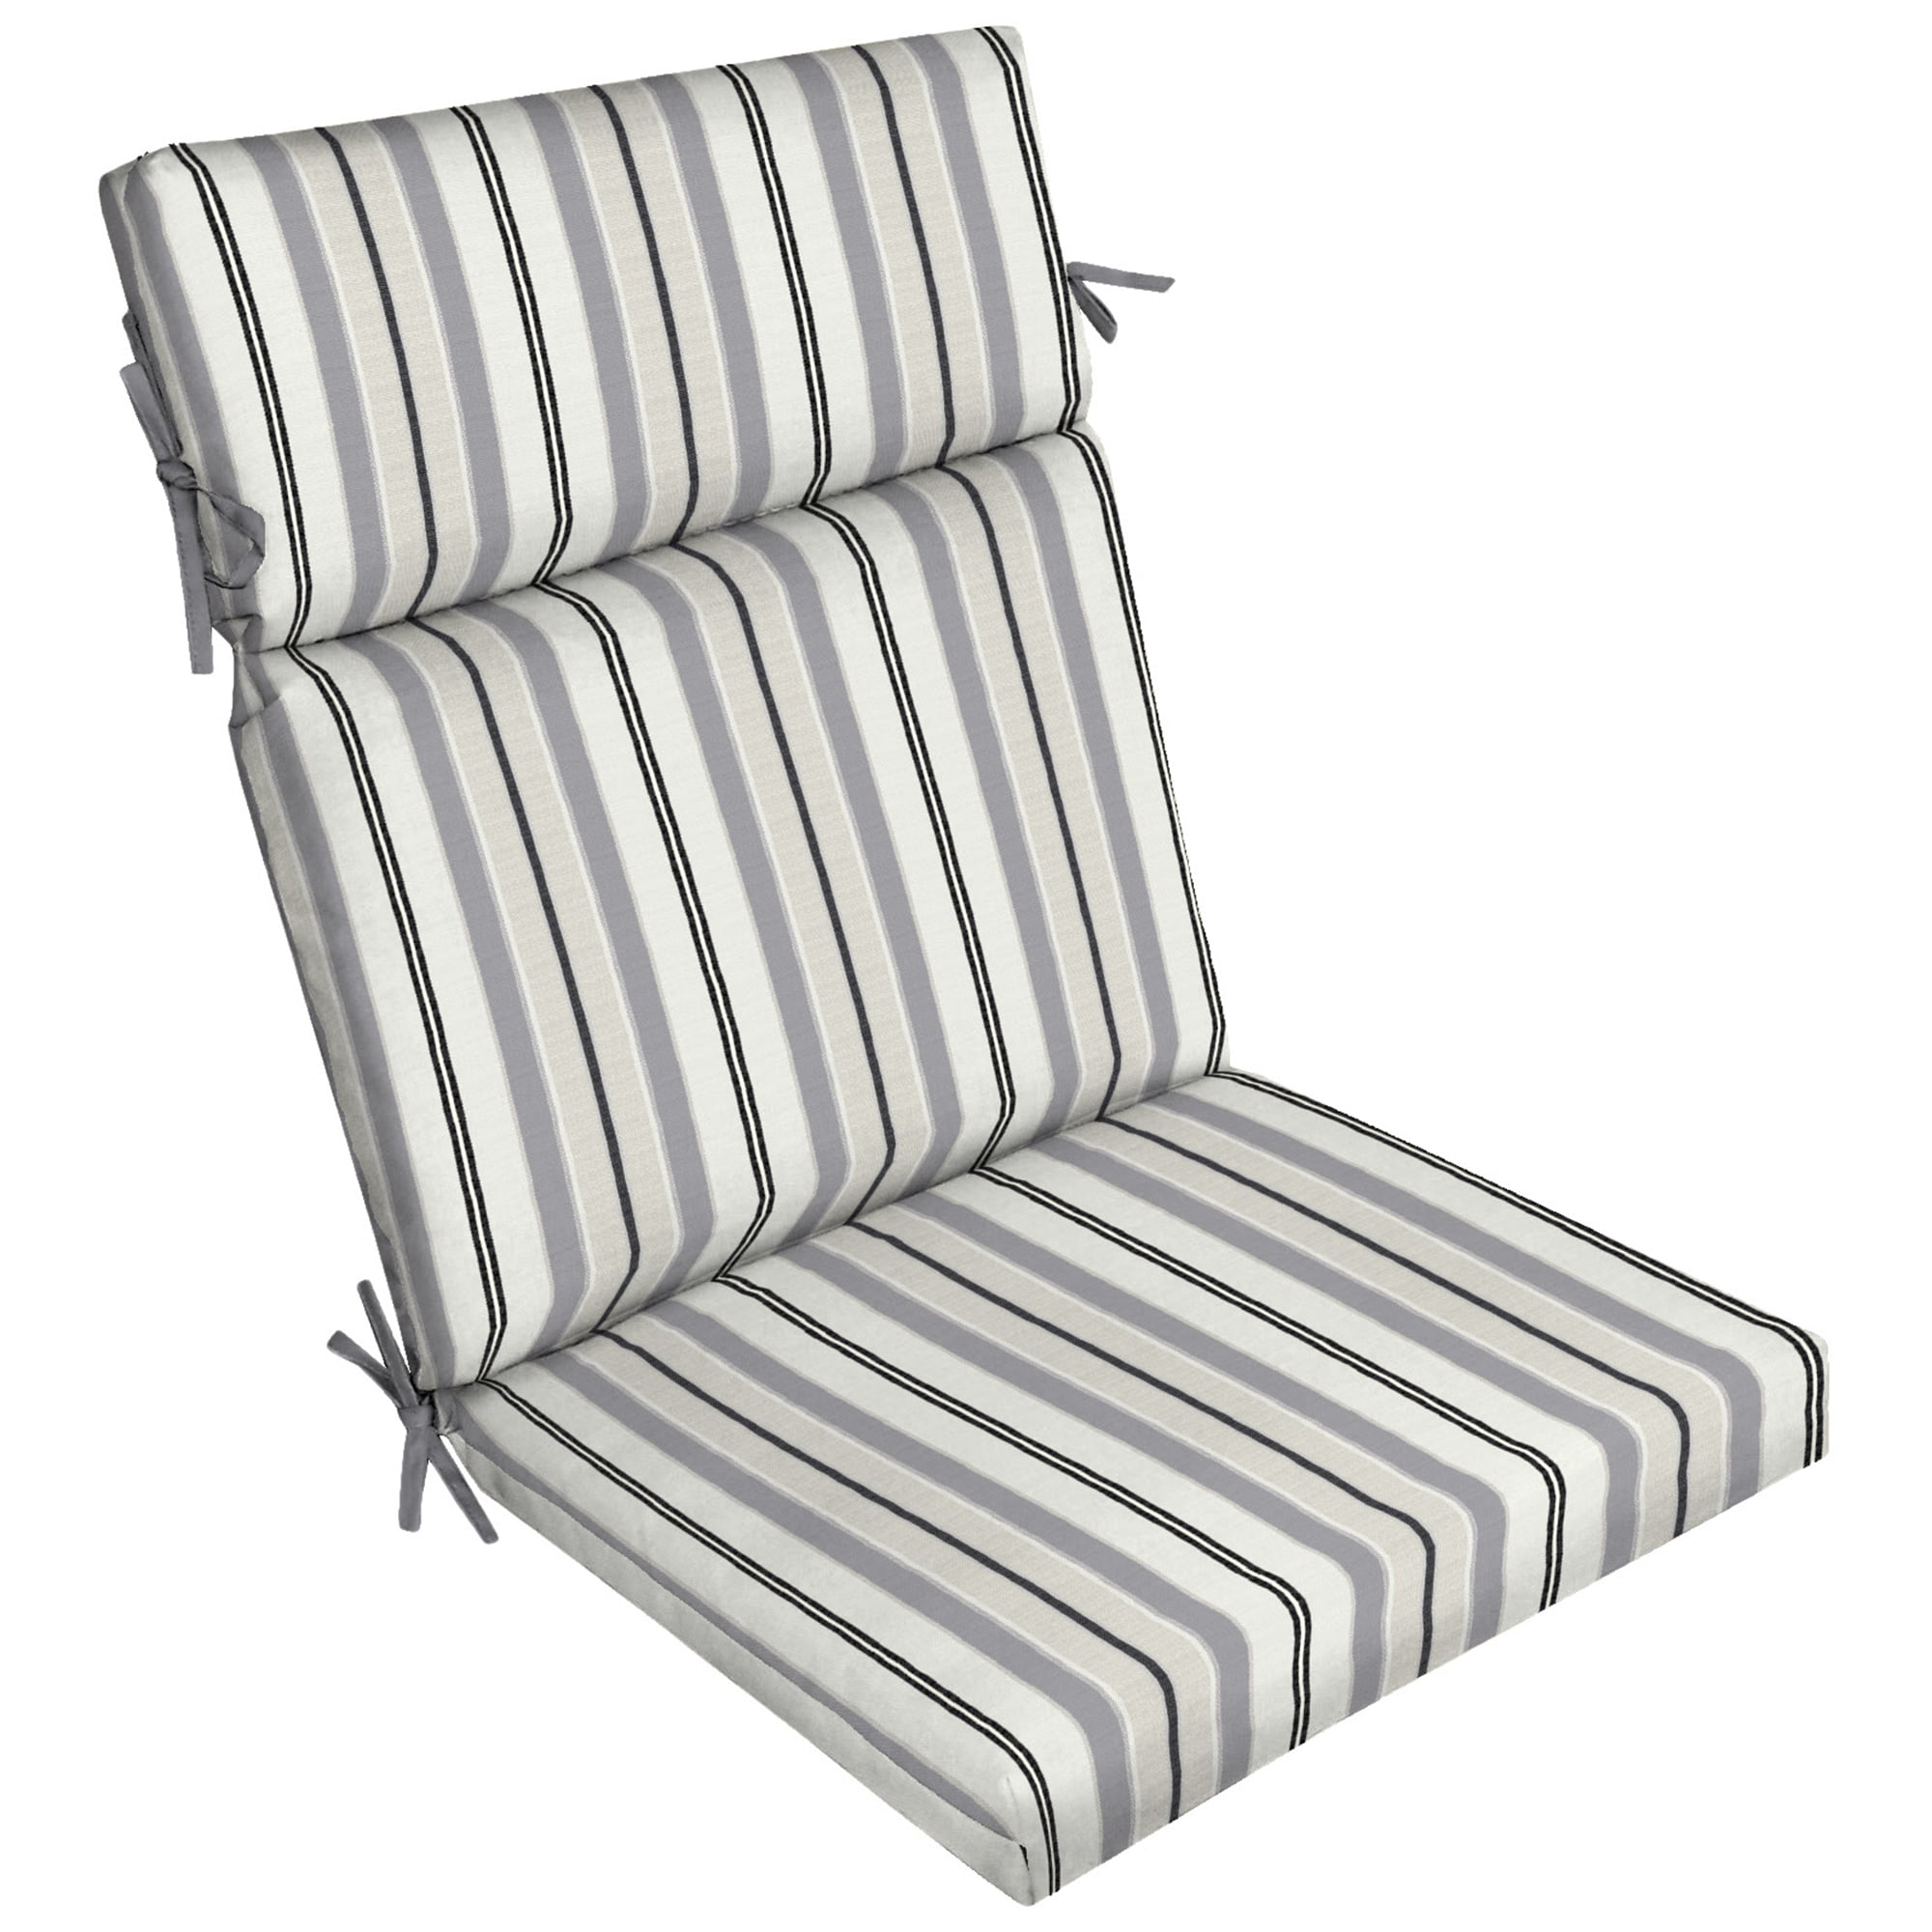 Better Homes Gardens Grey Stripe 44 X, Black And White Stripe Outdoor Dining Chair Cushion